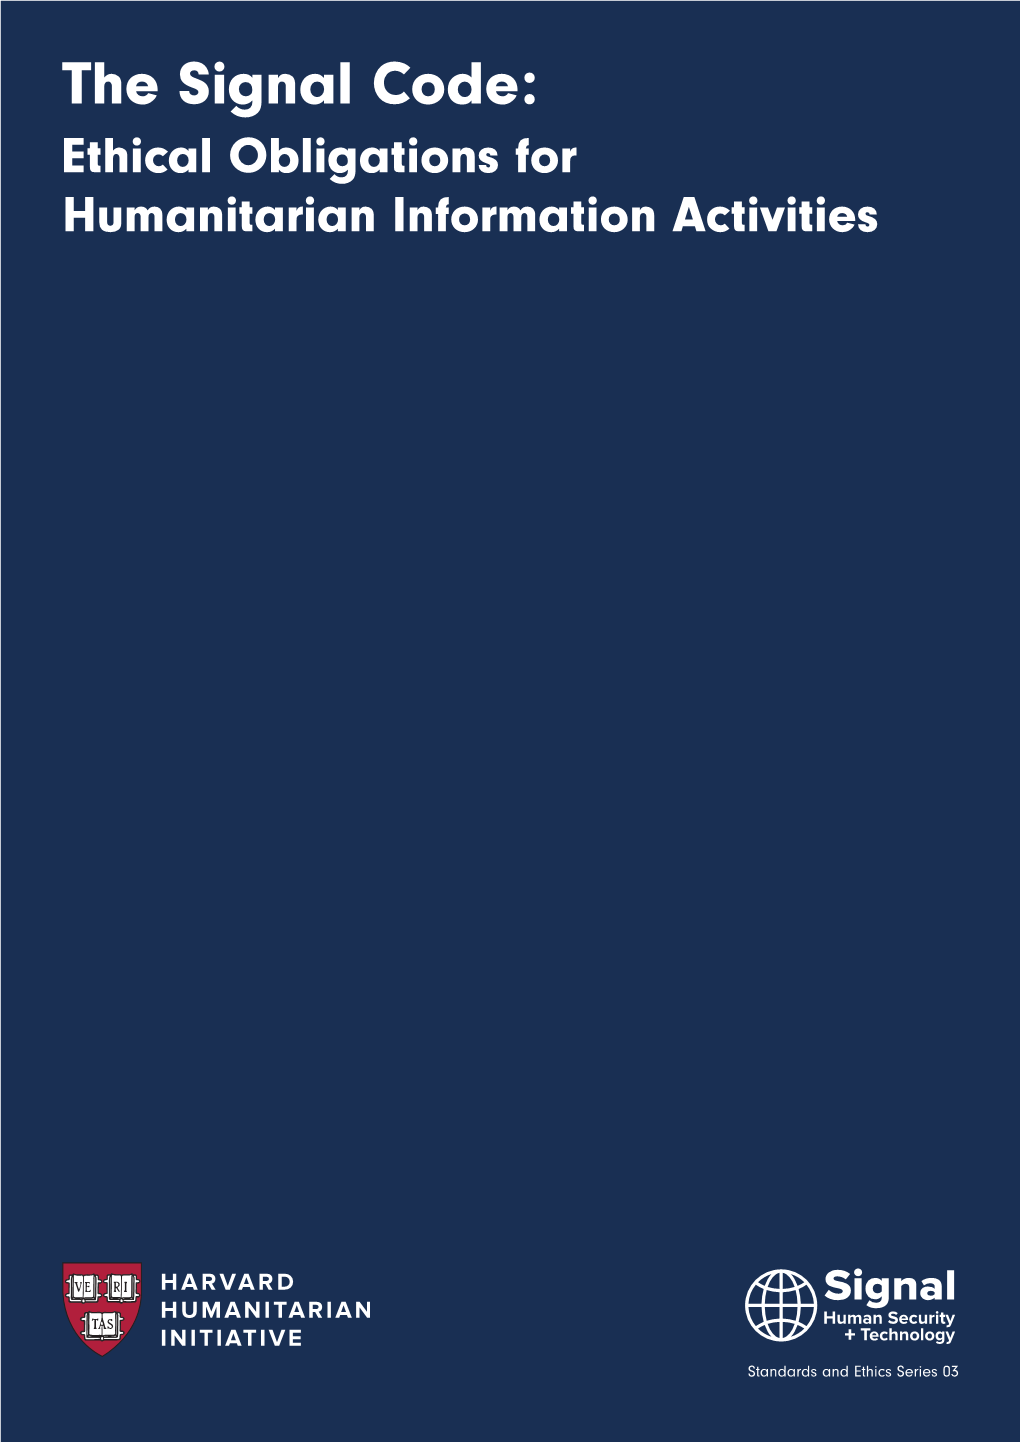 Ethical Obligations for Humanitarian Information Activities